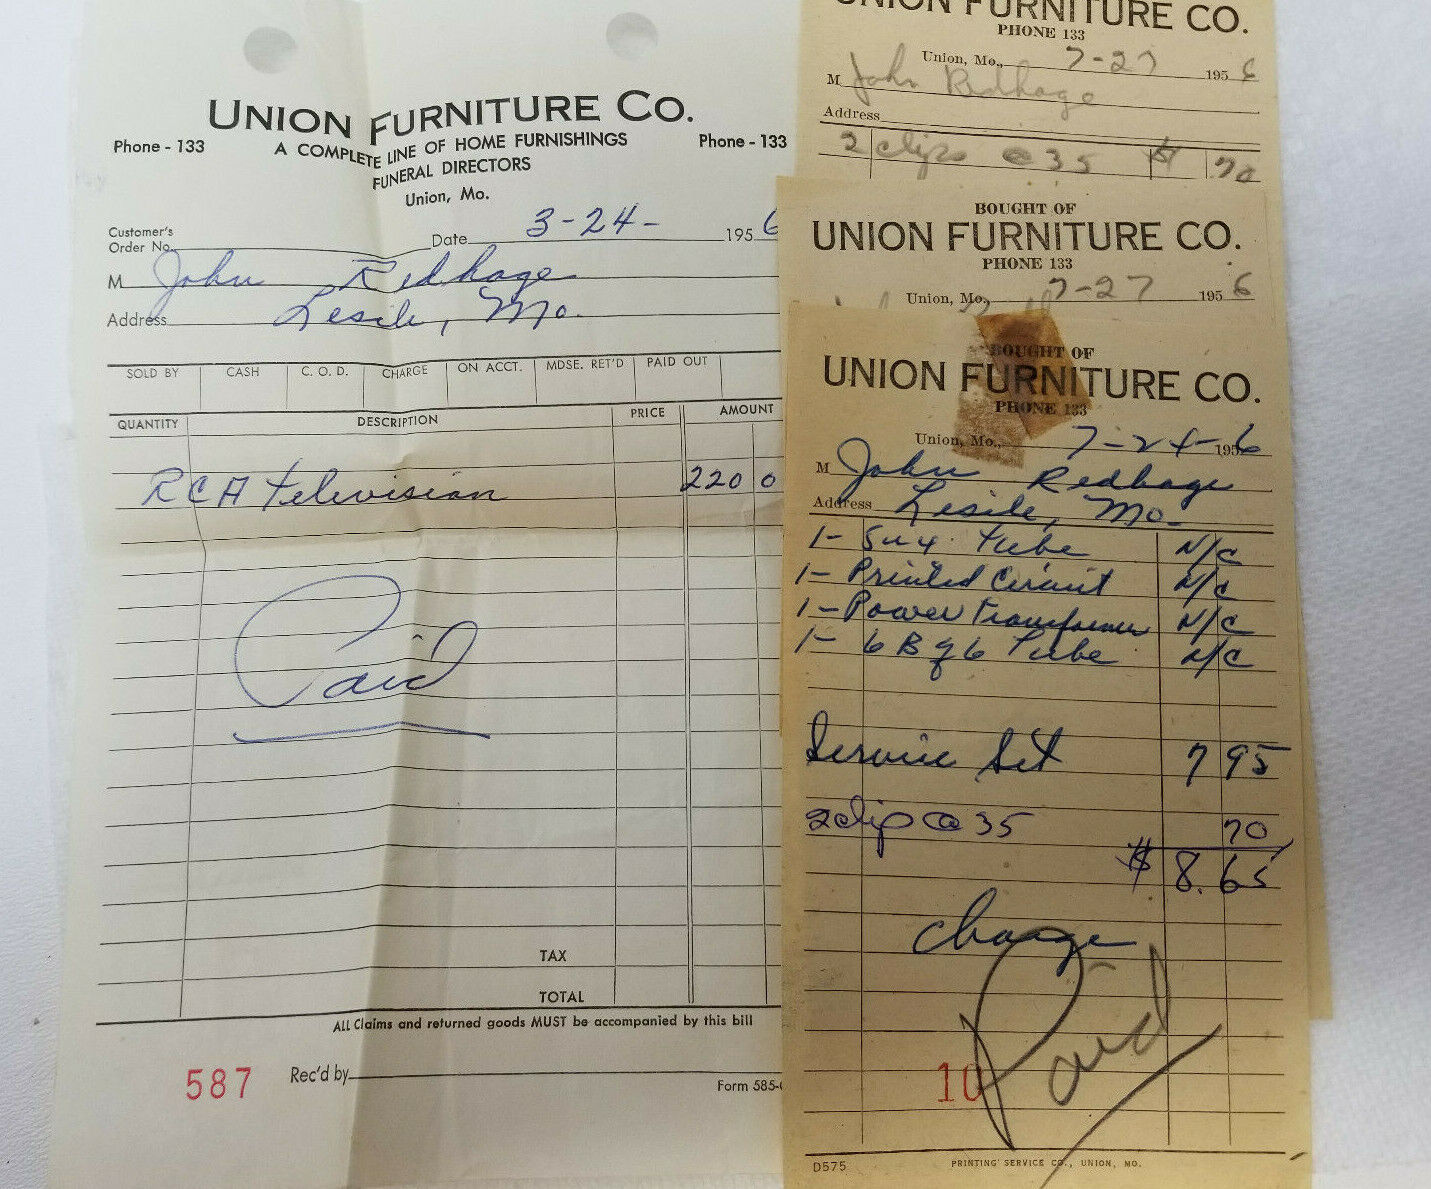 RCA Television Union Furniture Co Funeral Directors Vintage 1956 Order Receipts